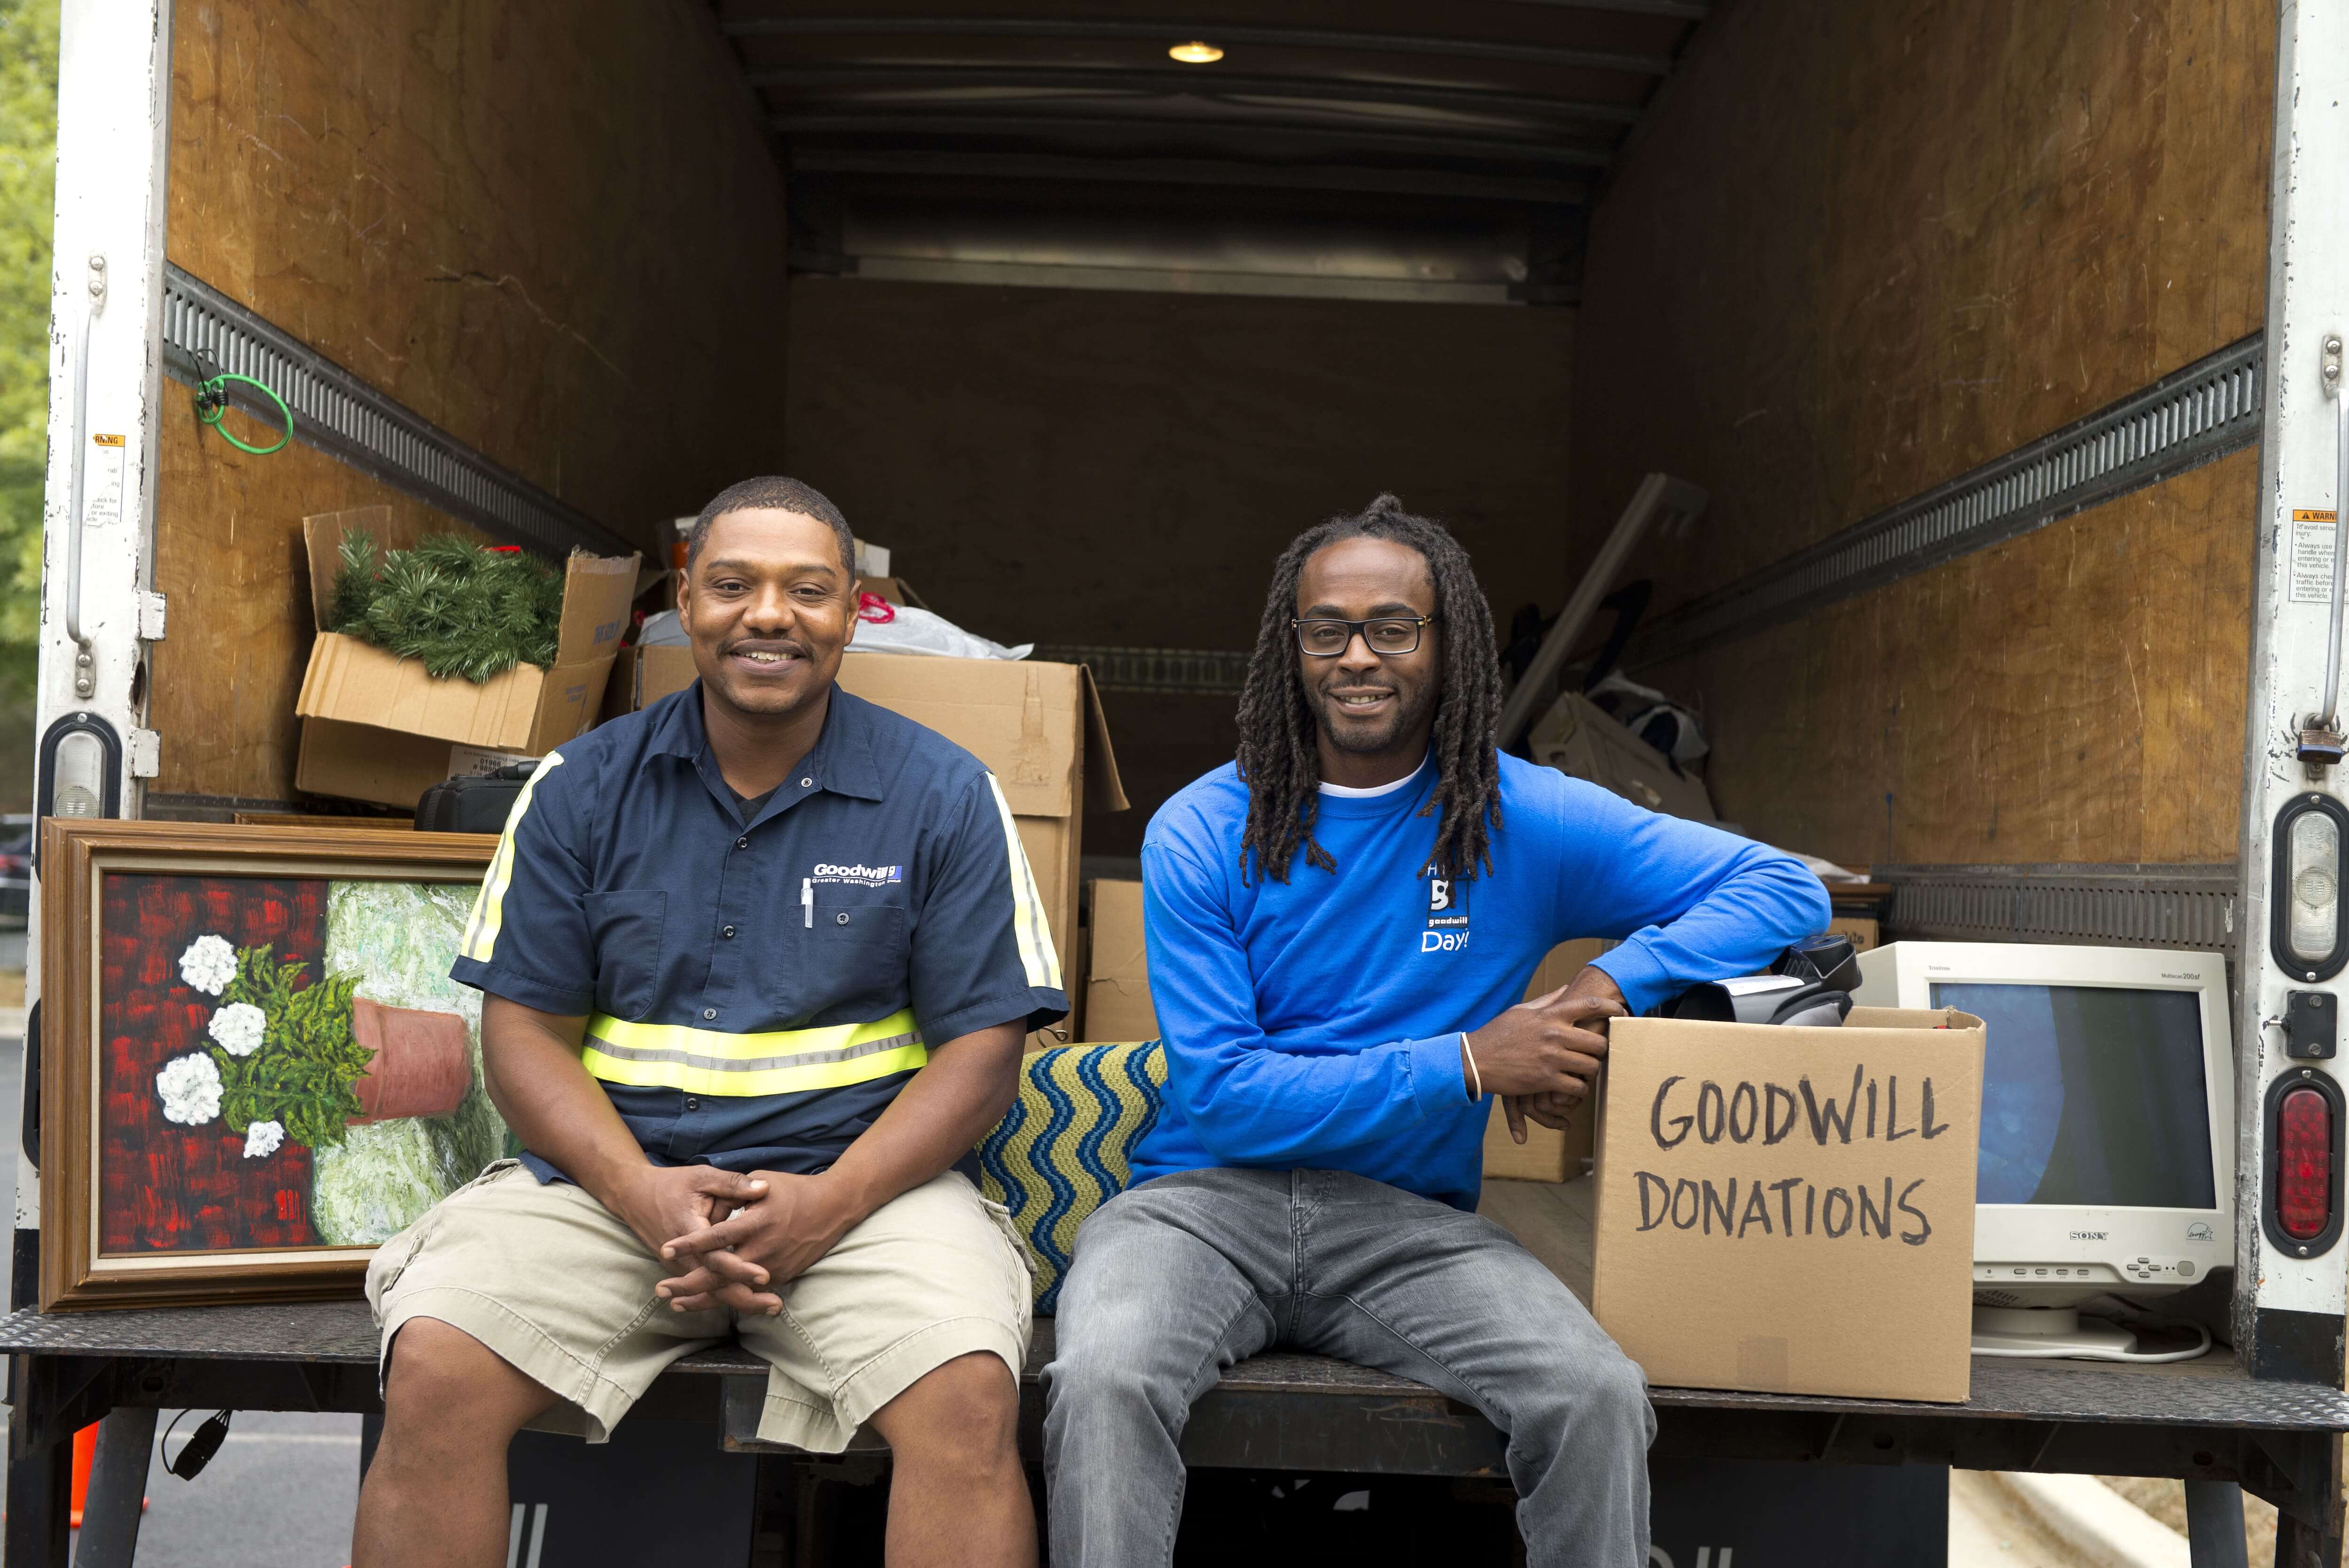 Two Goodwill drivers sitting in the back of the truck smiling with a box of donations